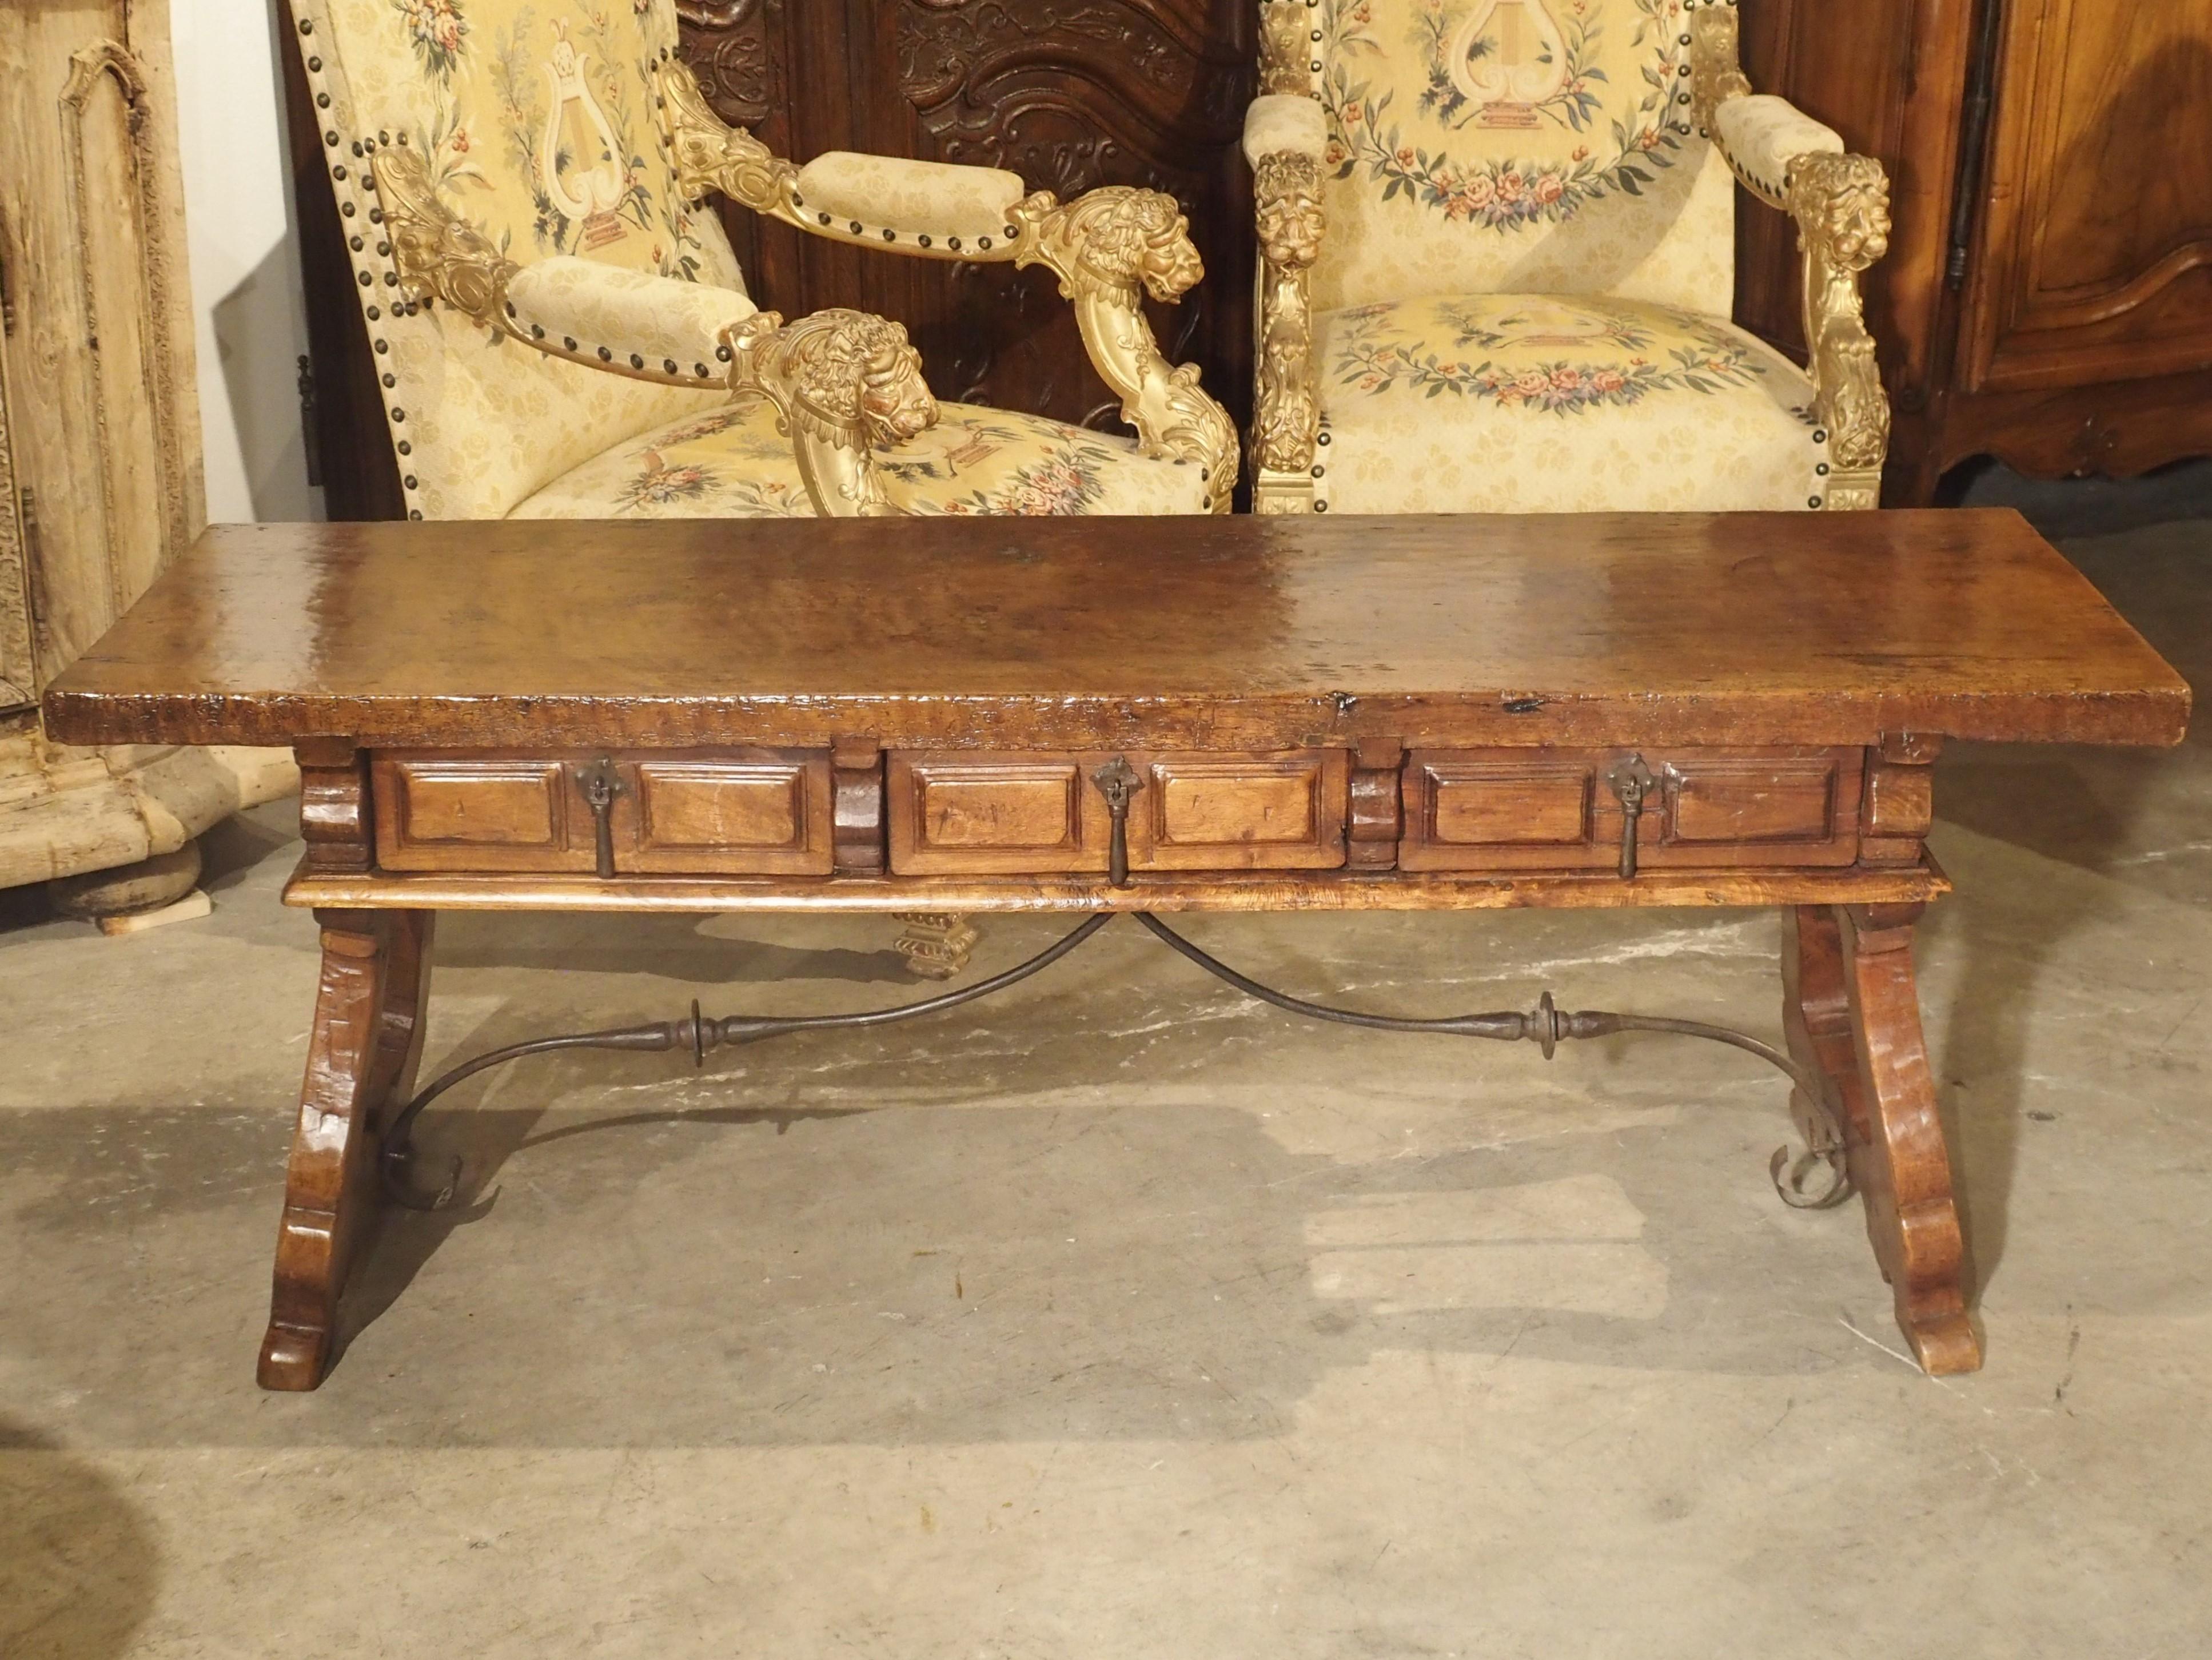 This wonderful walnut wood coffee table from Spain dates to the 1600s, although around the turn of the last century, the legs were replaced to form a coffee table (Low coffee tables only came to be in the late 1800s). The top is one plank of walnut